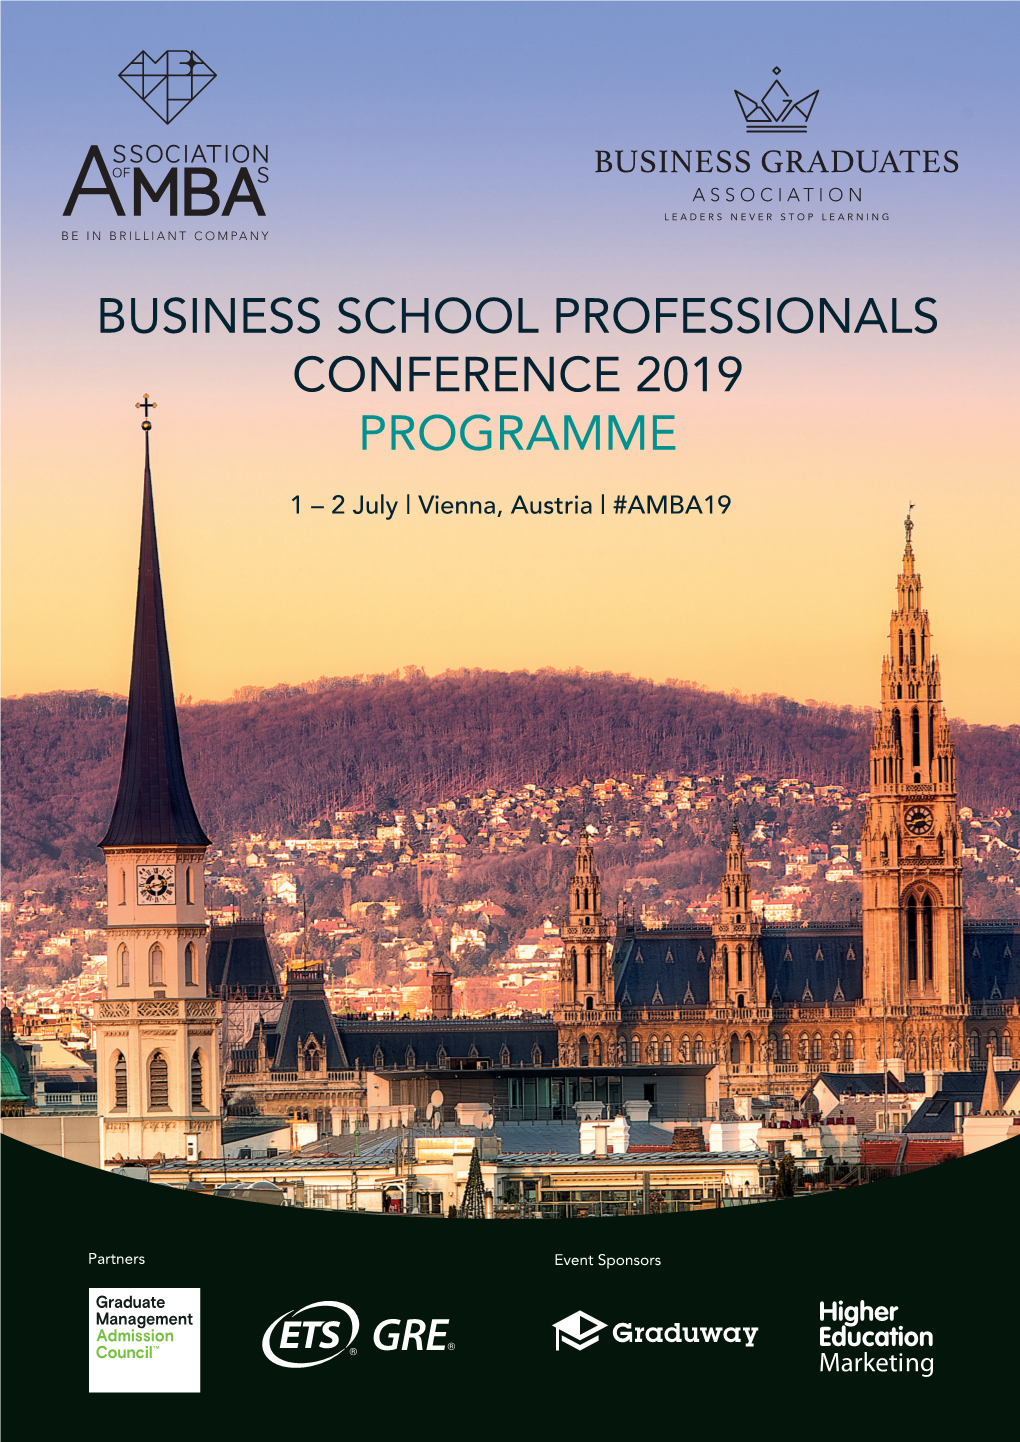 Business School Professionals Conference 2019 Programme